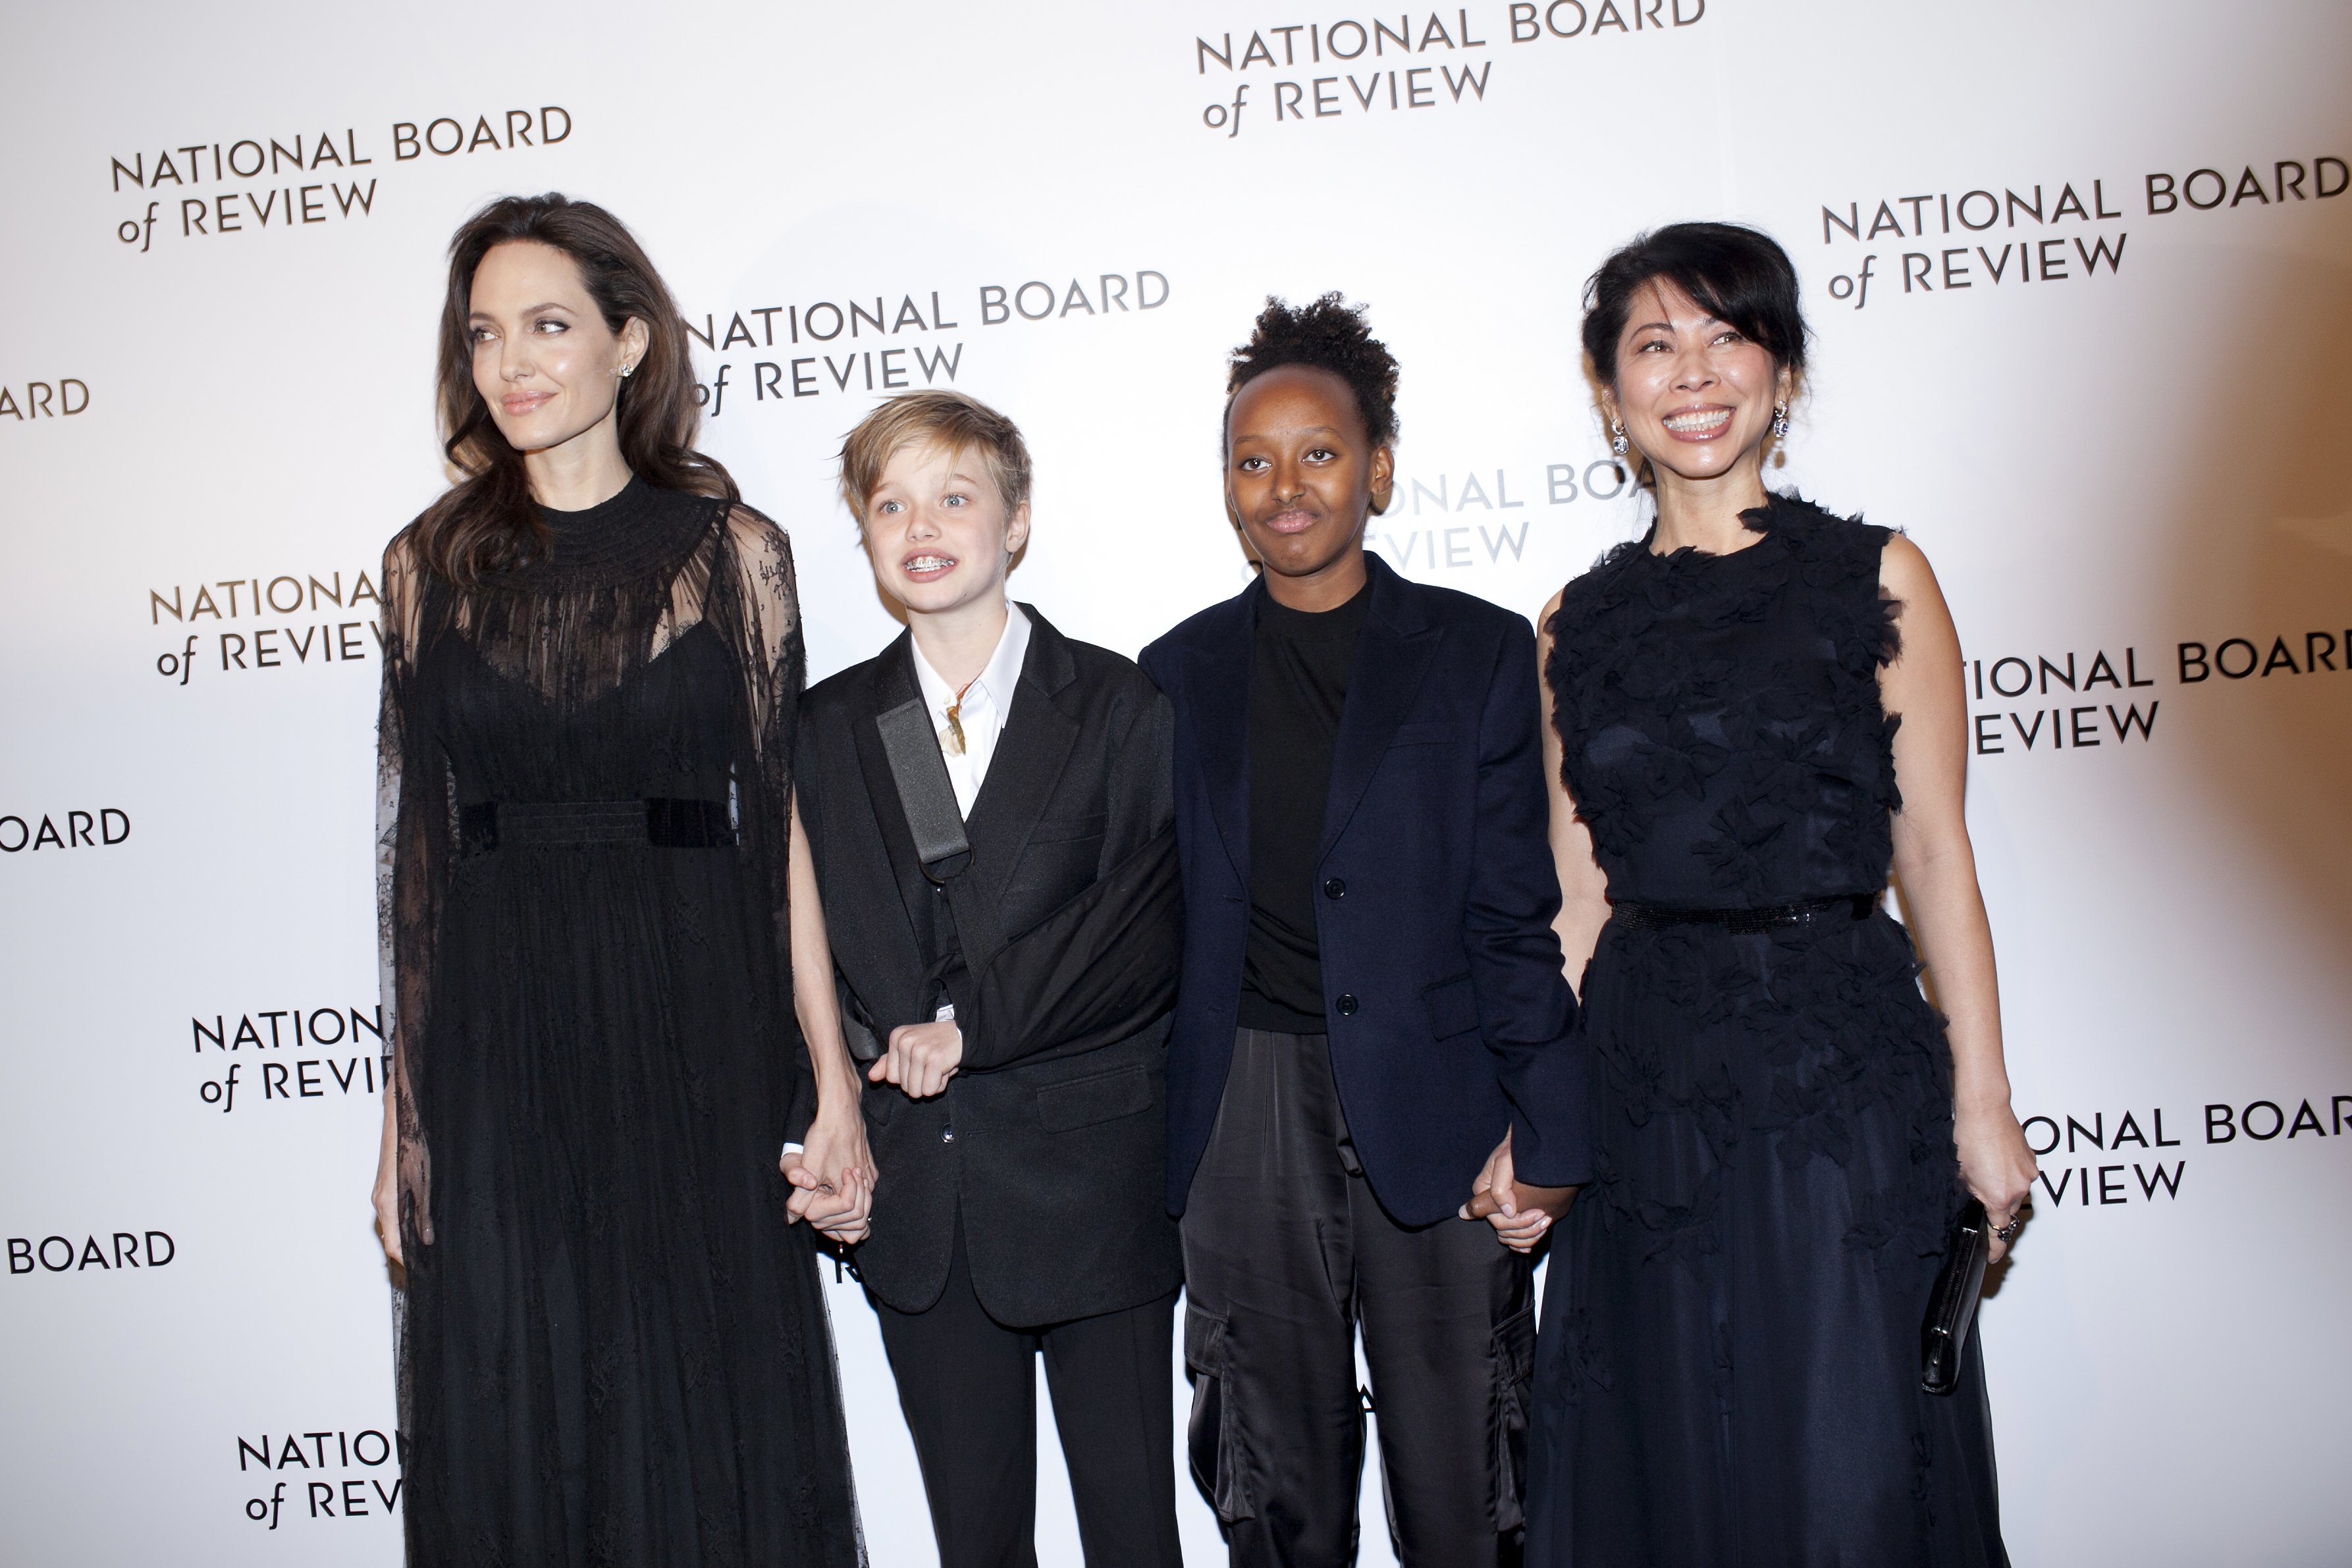 Angelina Jolie, Shiloh Jolie-Pitt, Zahara Jolie-Pitt, and Loung Ung at The National Board of Review Awards Gala in New York, on Jan 9, 2018 | Source: Getty Images